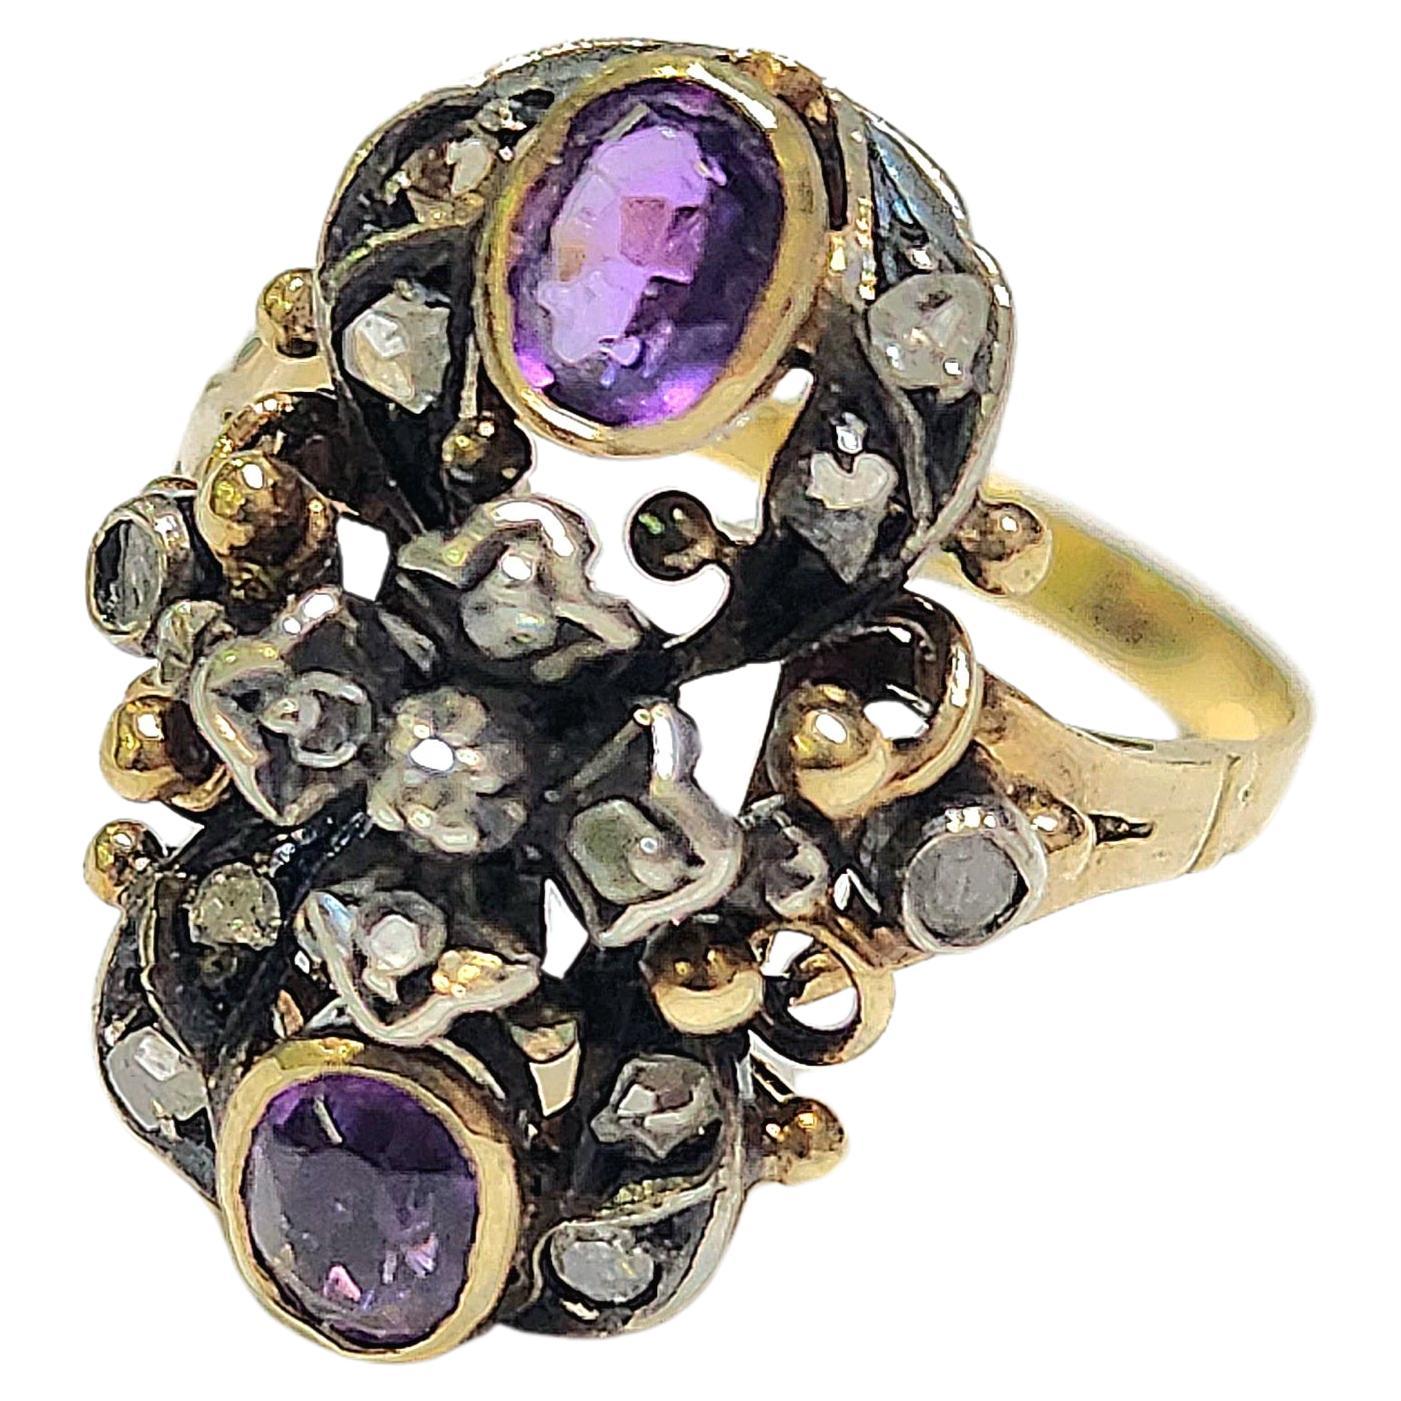 Antique amethyst ring centered with 2 natural pink oval cut amethyst decorted with rose cut diamonds in 18k gold setting with ornament design ring dates back to europe 19th century 